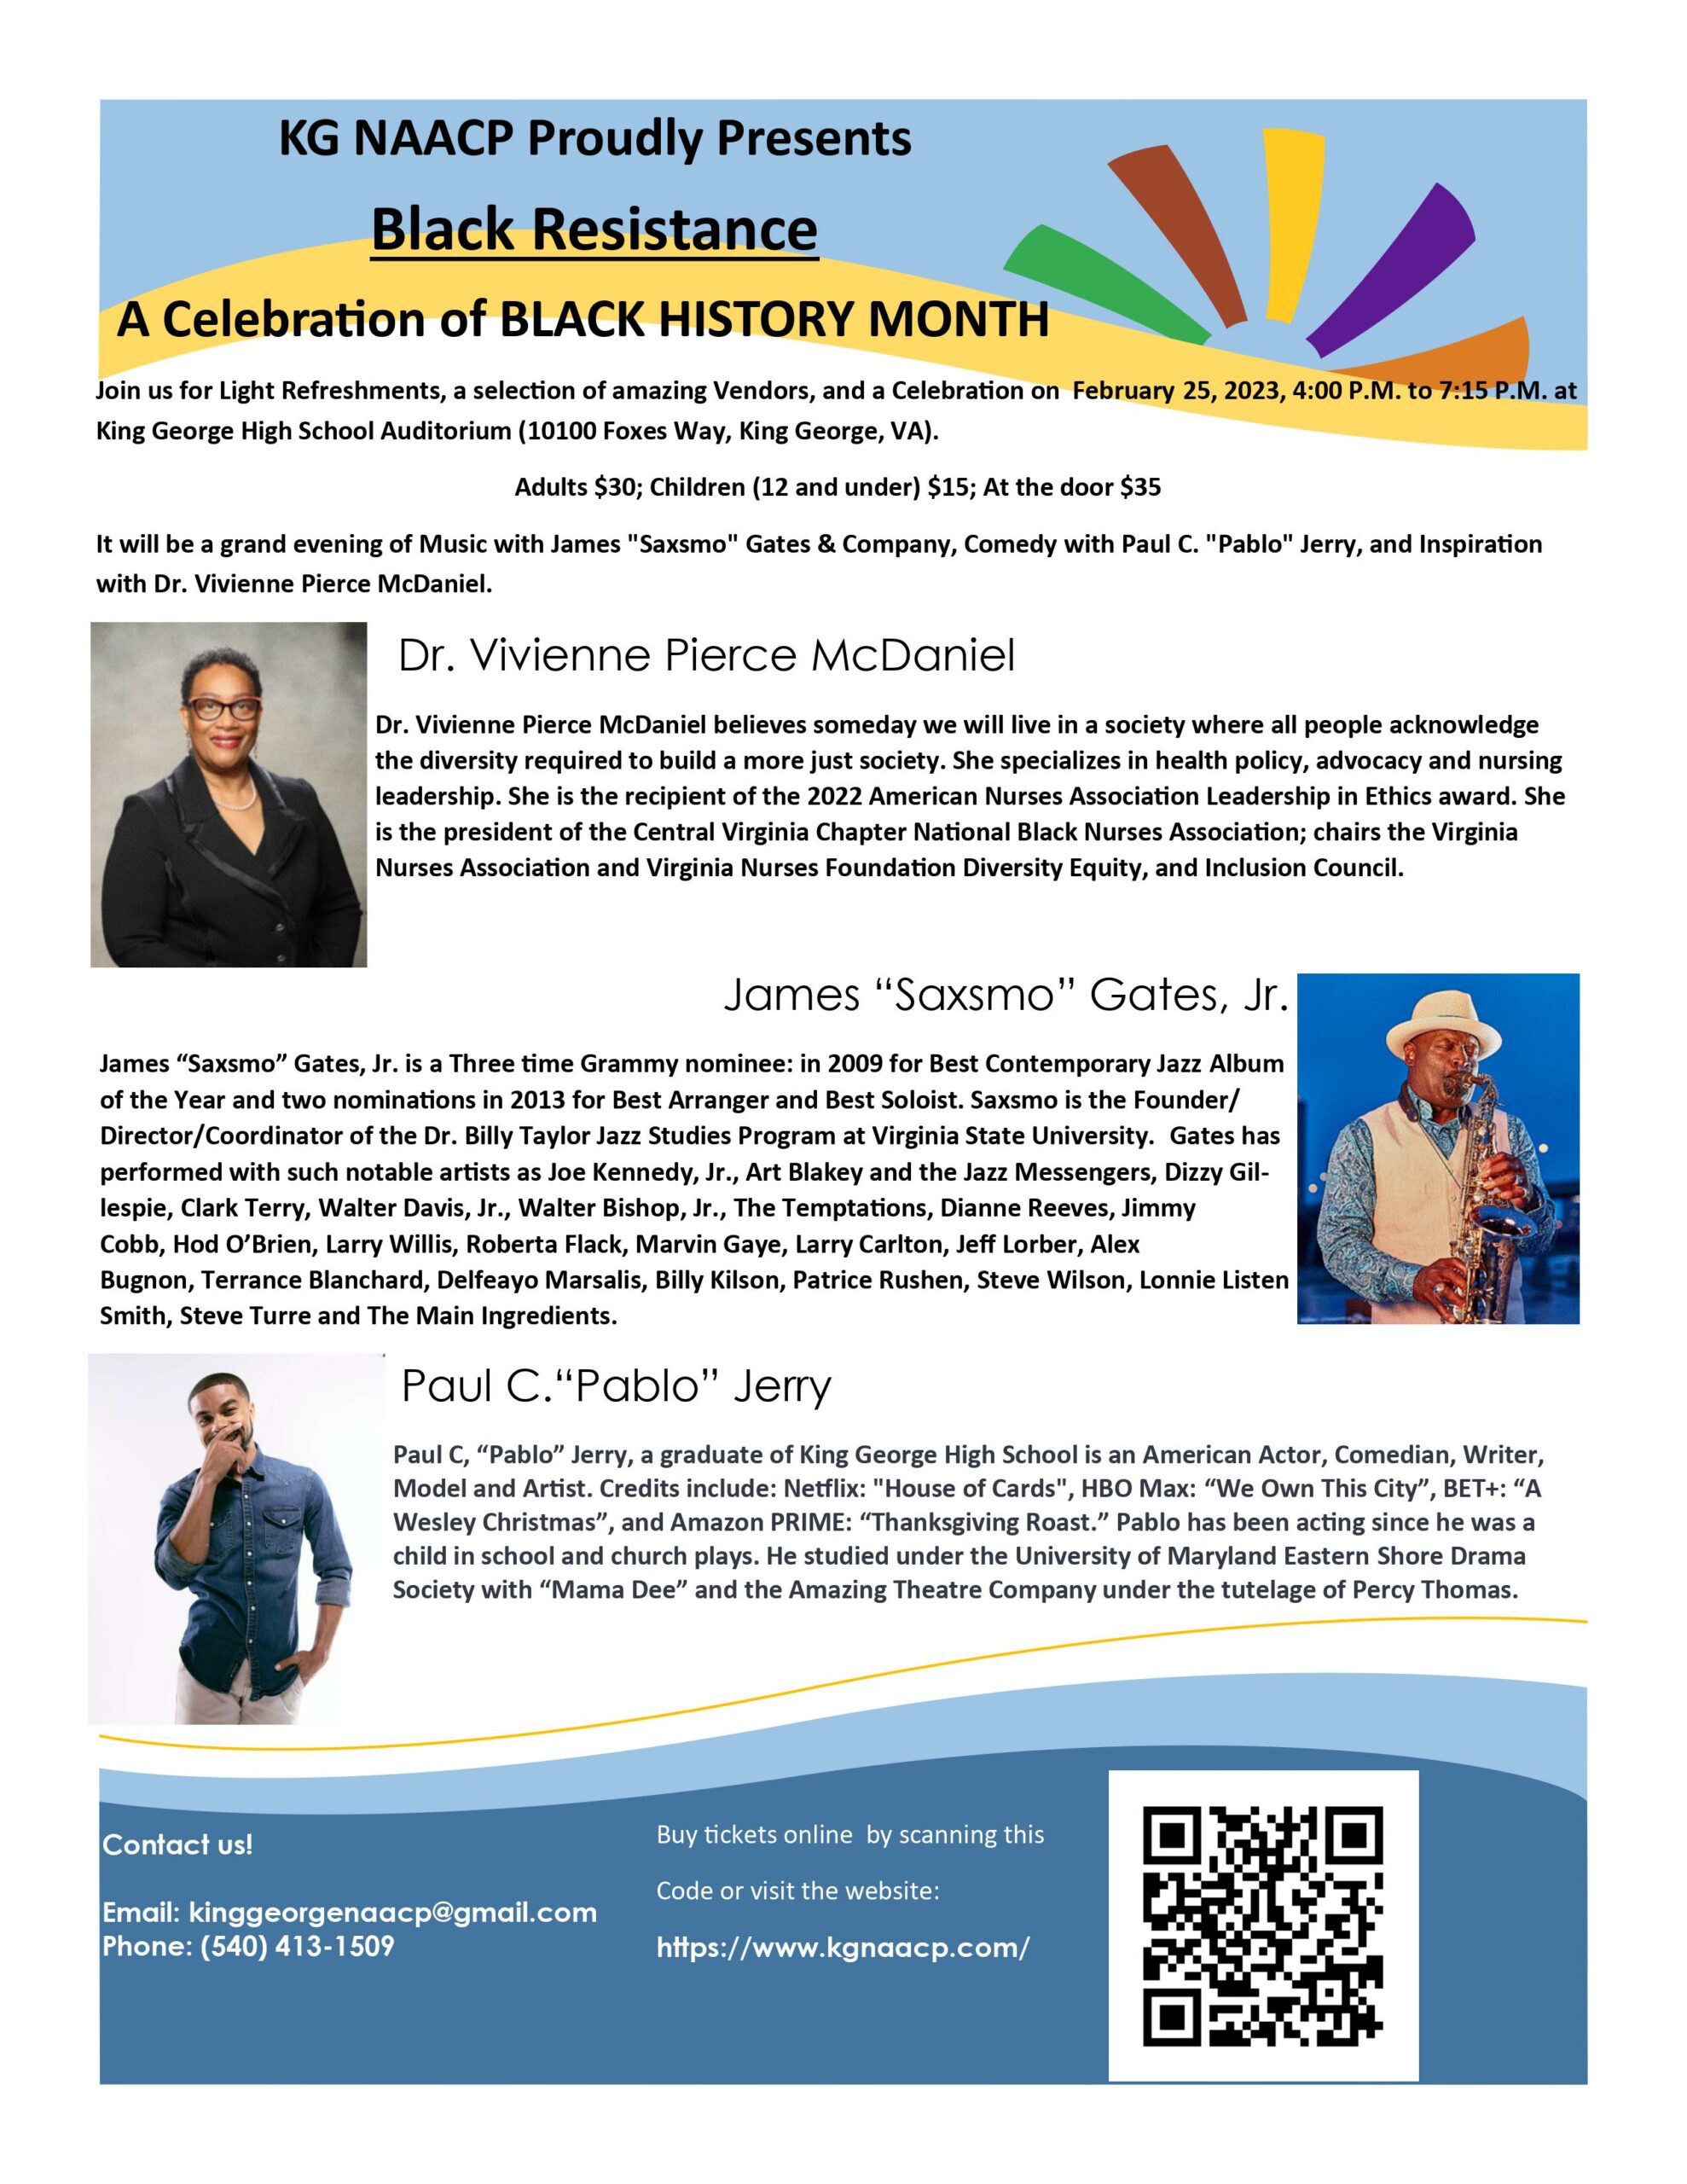 <h1 class="tribe-events-single-event-title">Black History Month Celebration</h1>